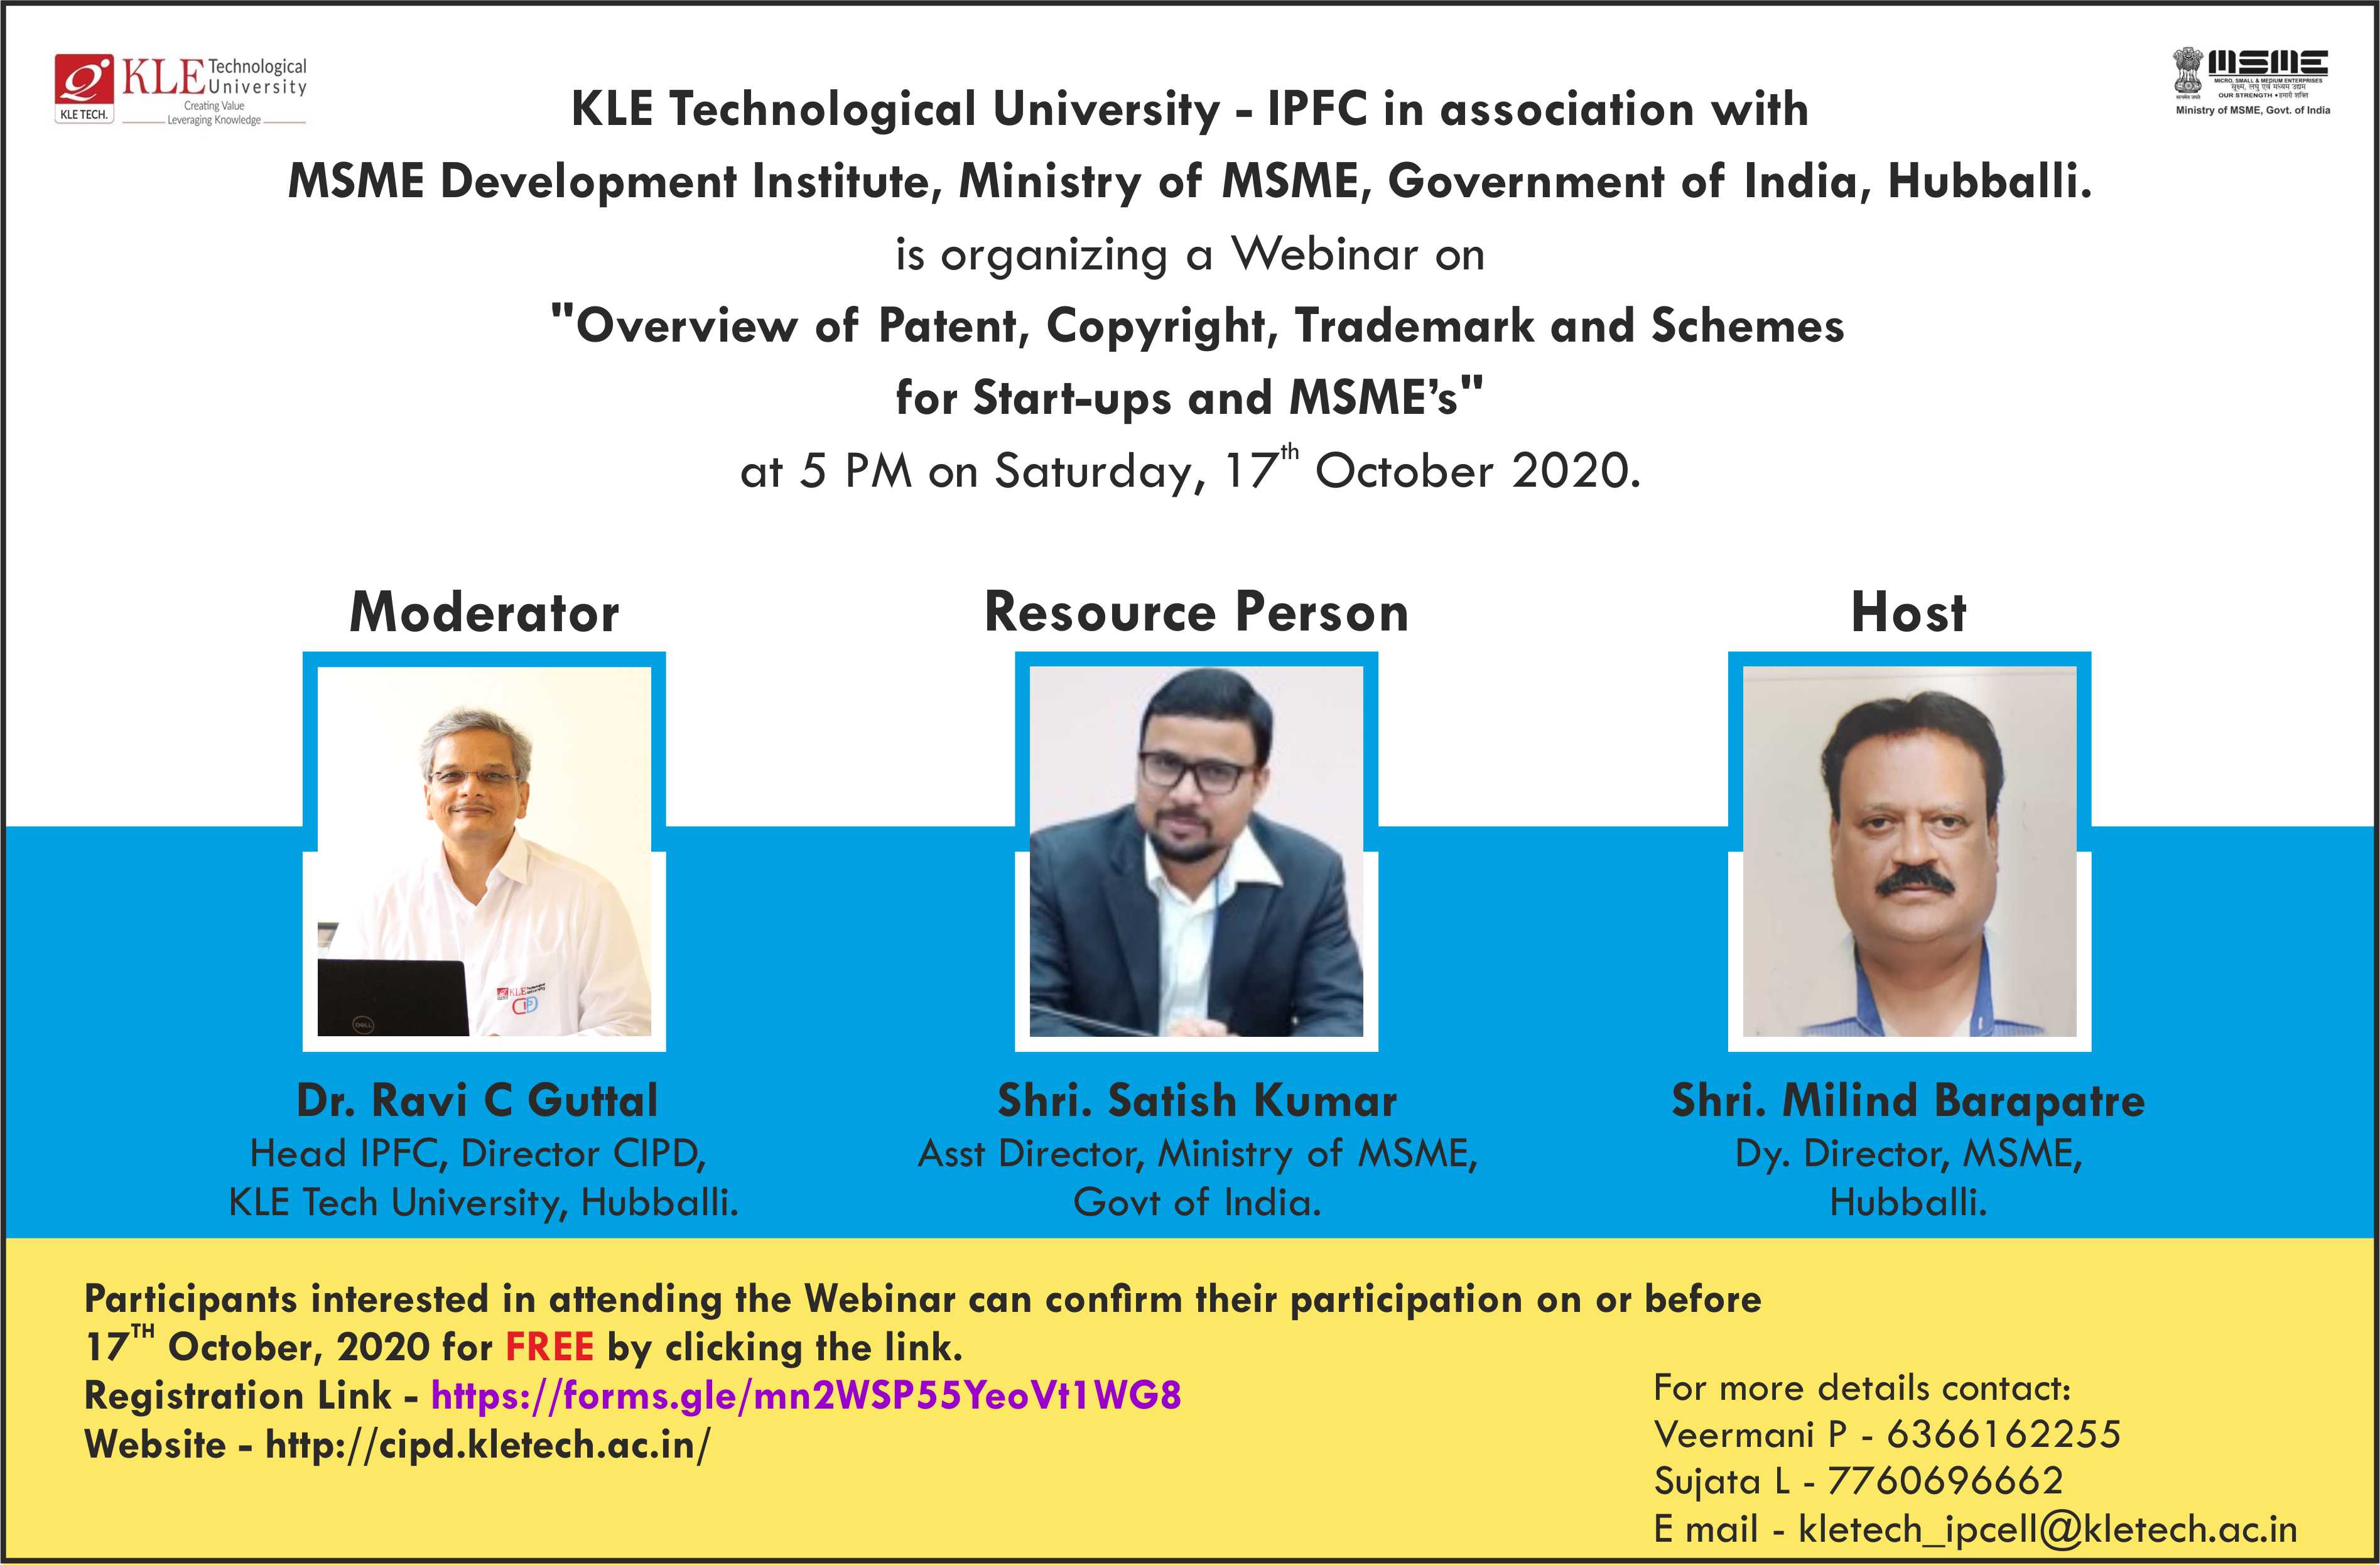 Webinar on Overview of Patent, Copyright, Trademark and Schemes for Start-ups and MSME’s